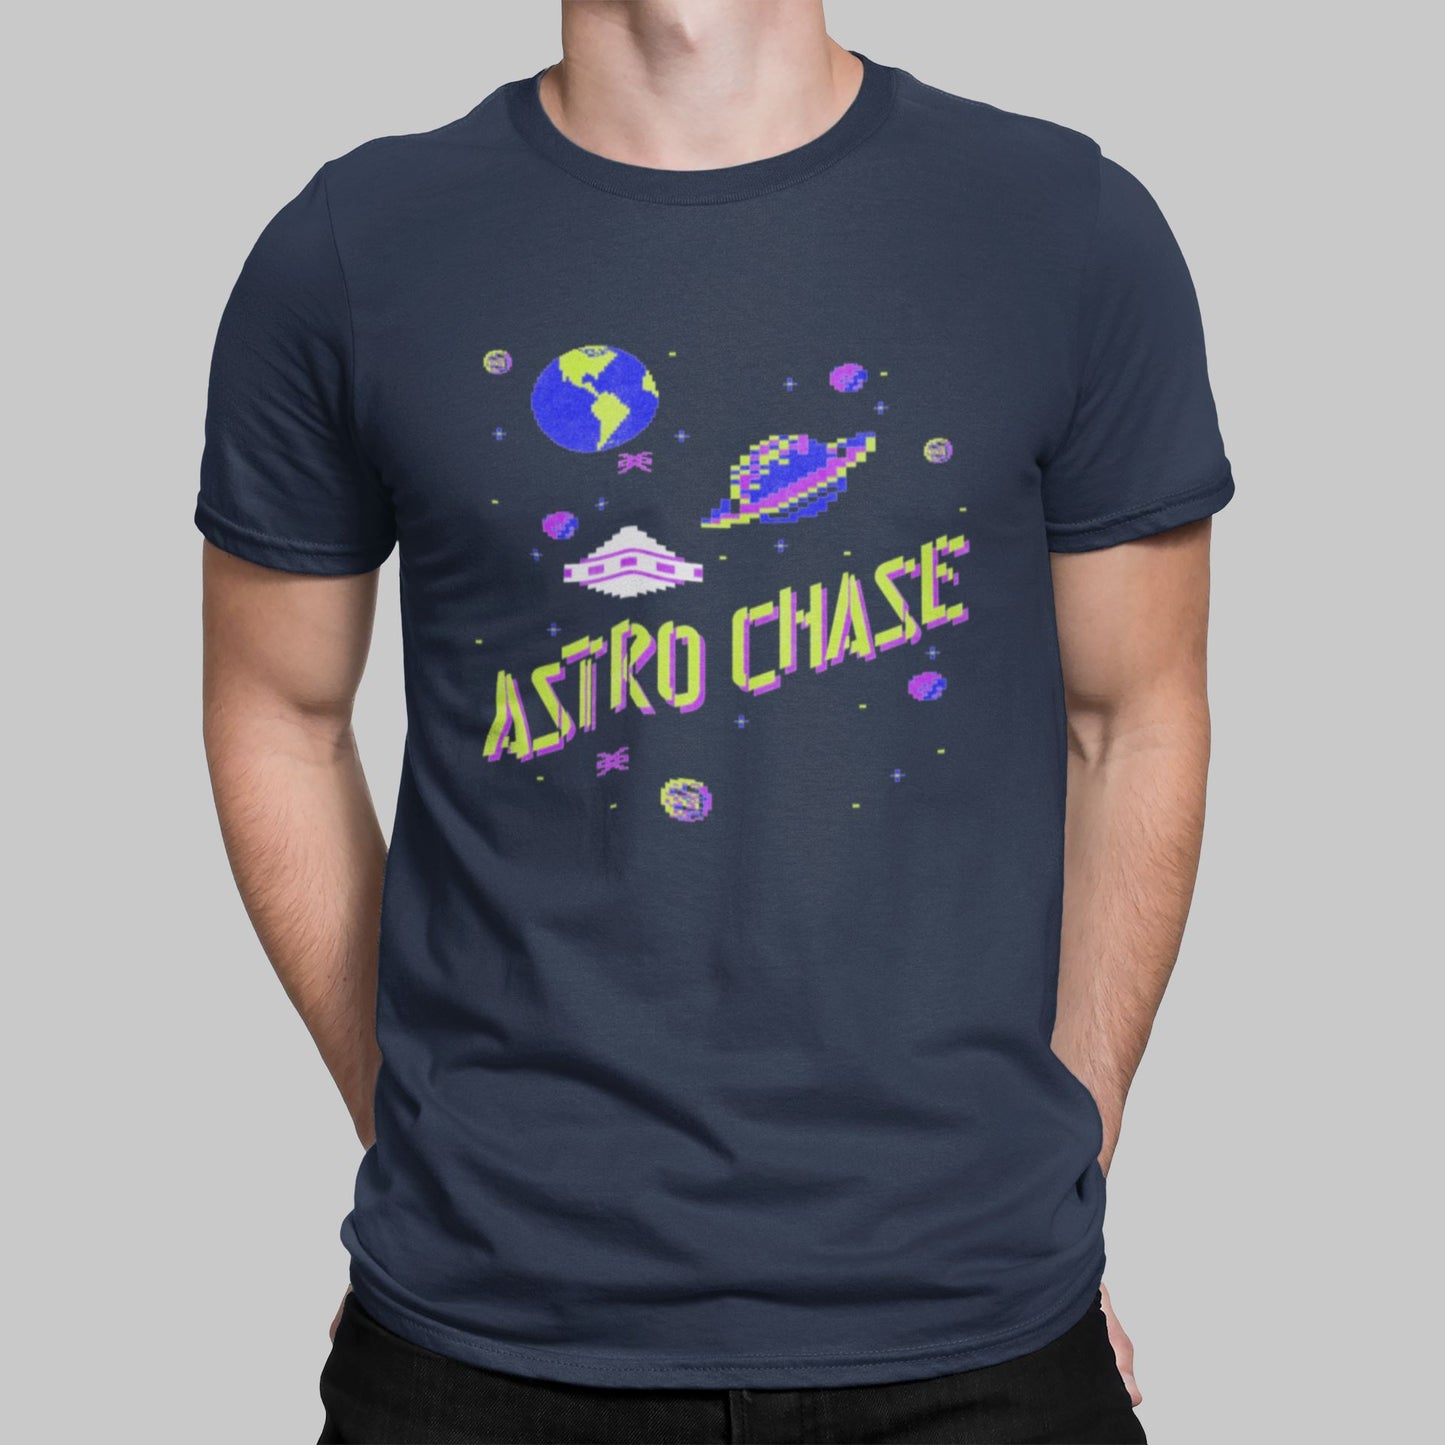 Astro Chase Retro Gaming T-Shirt T-Shirt Seven Squared Small 34-36" Navy 